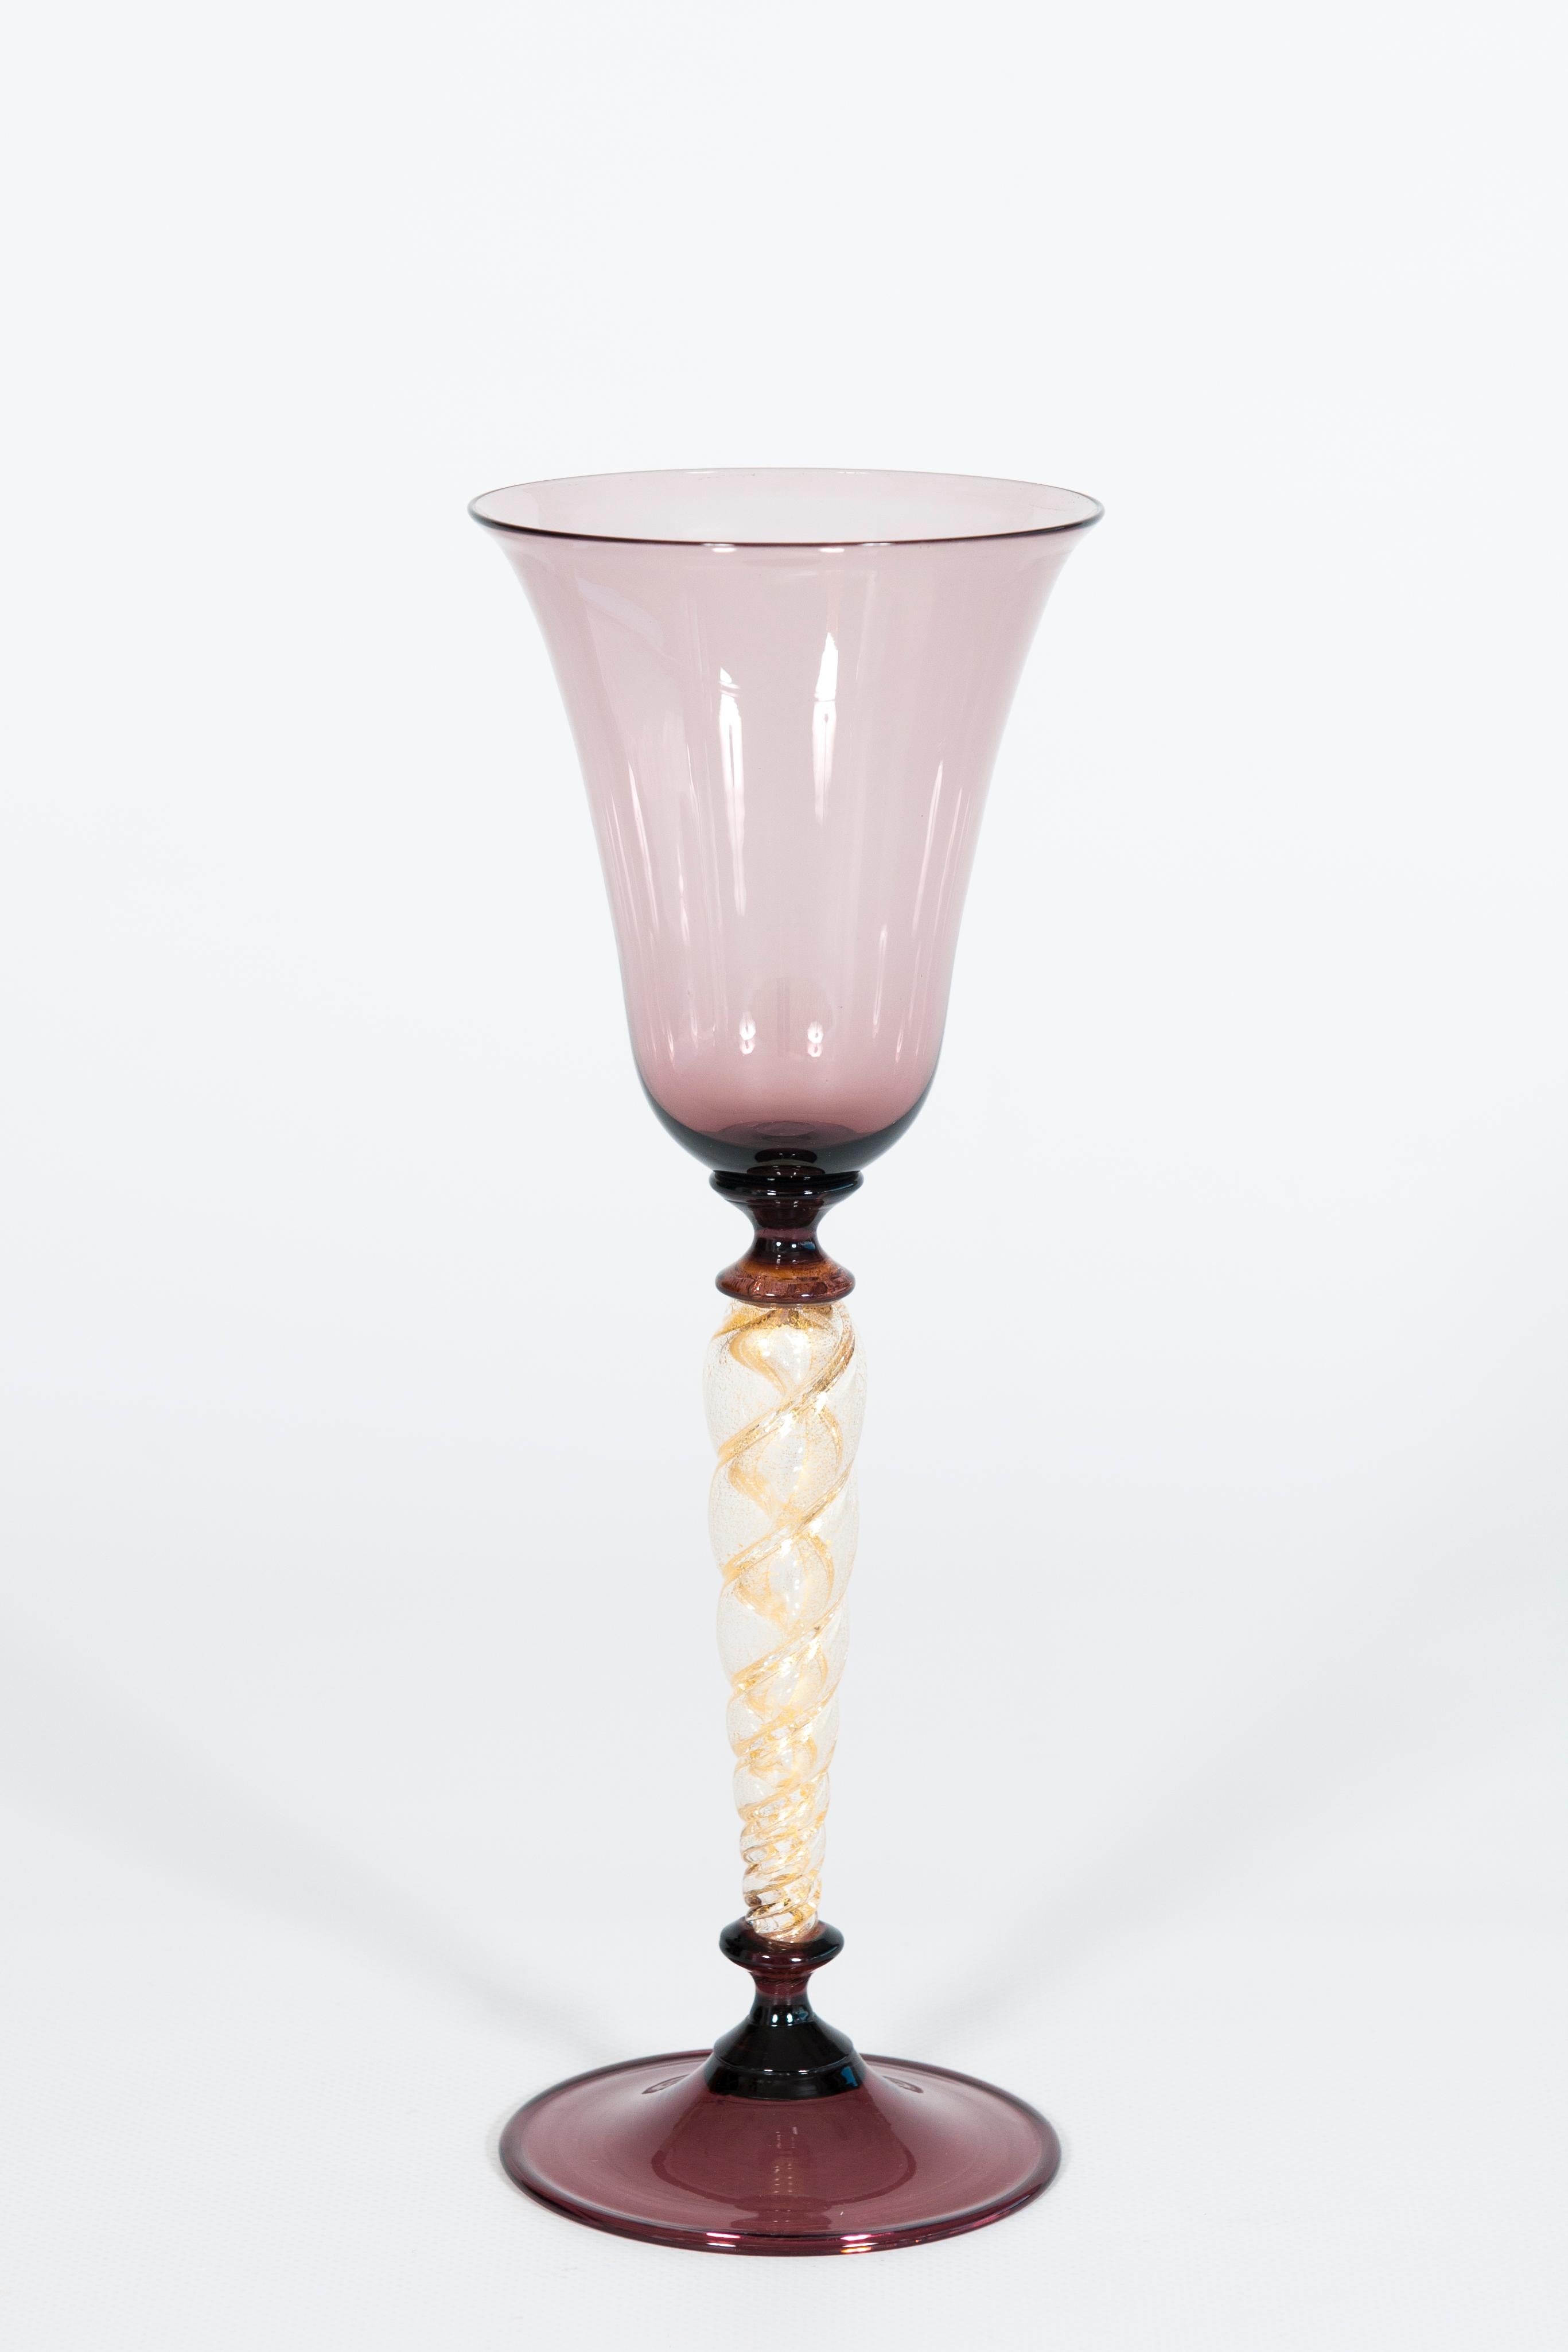 Stem Glass in Amethyst Murano Glass with Spiral Stem in Gold Leaf Italy 1990s.
Entirely handmade of Murano glass and gold leaf in the 1990s, this sophisticated stem glass is attributed to the Venetian glassmaker Maestro nicknamed 